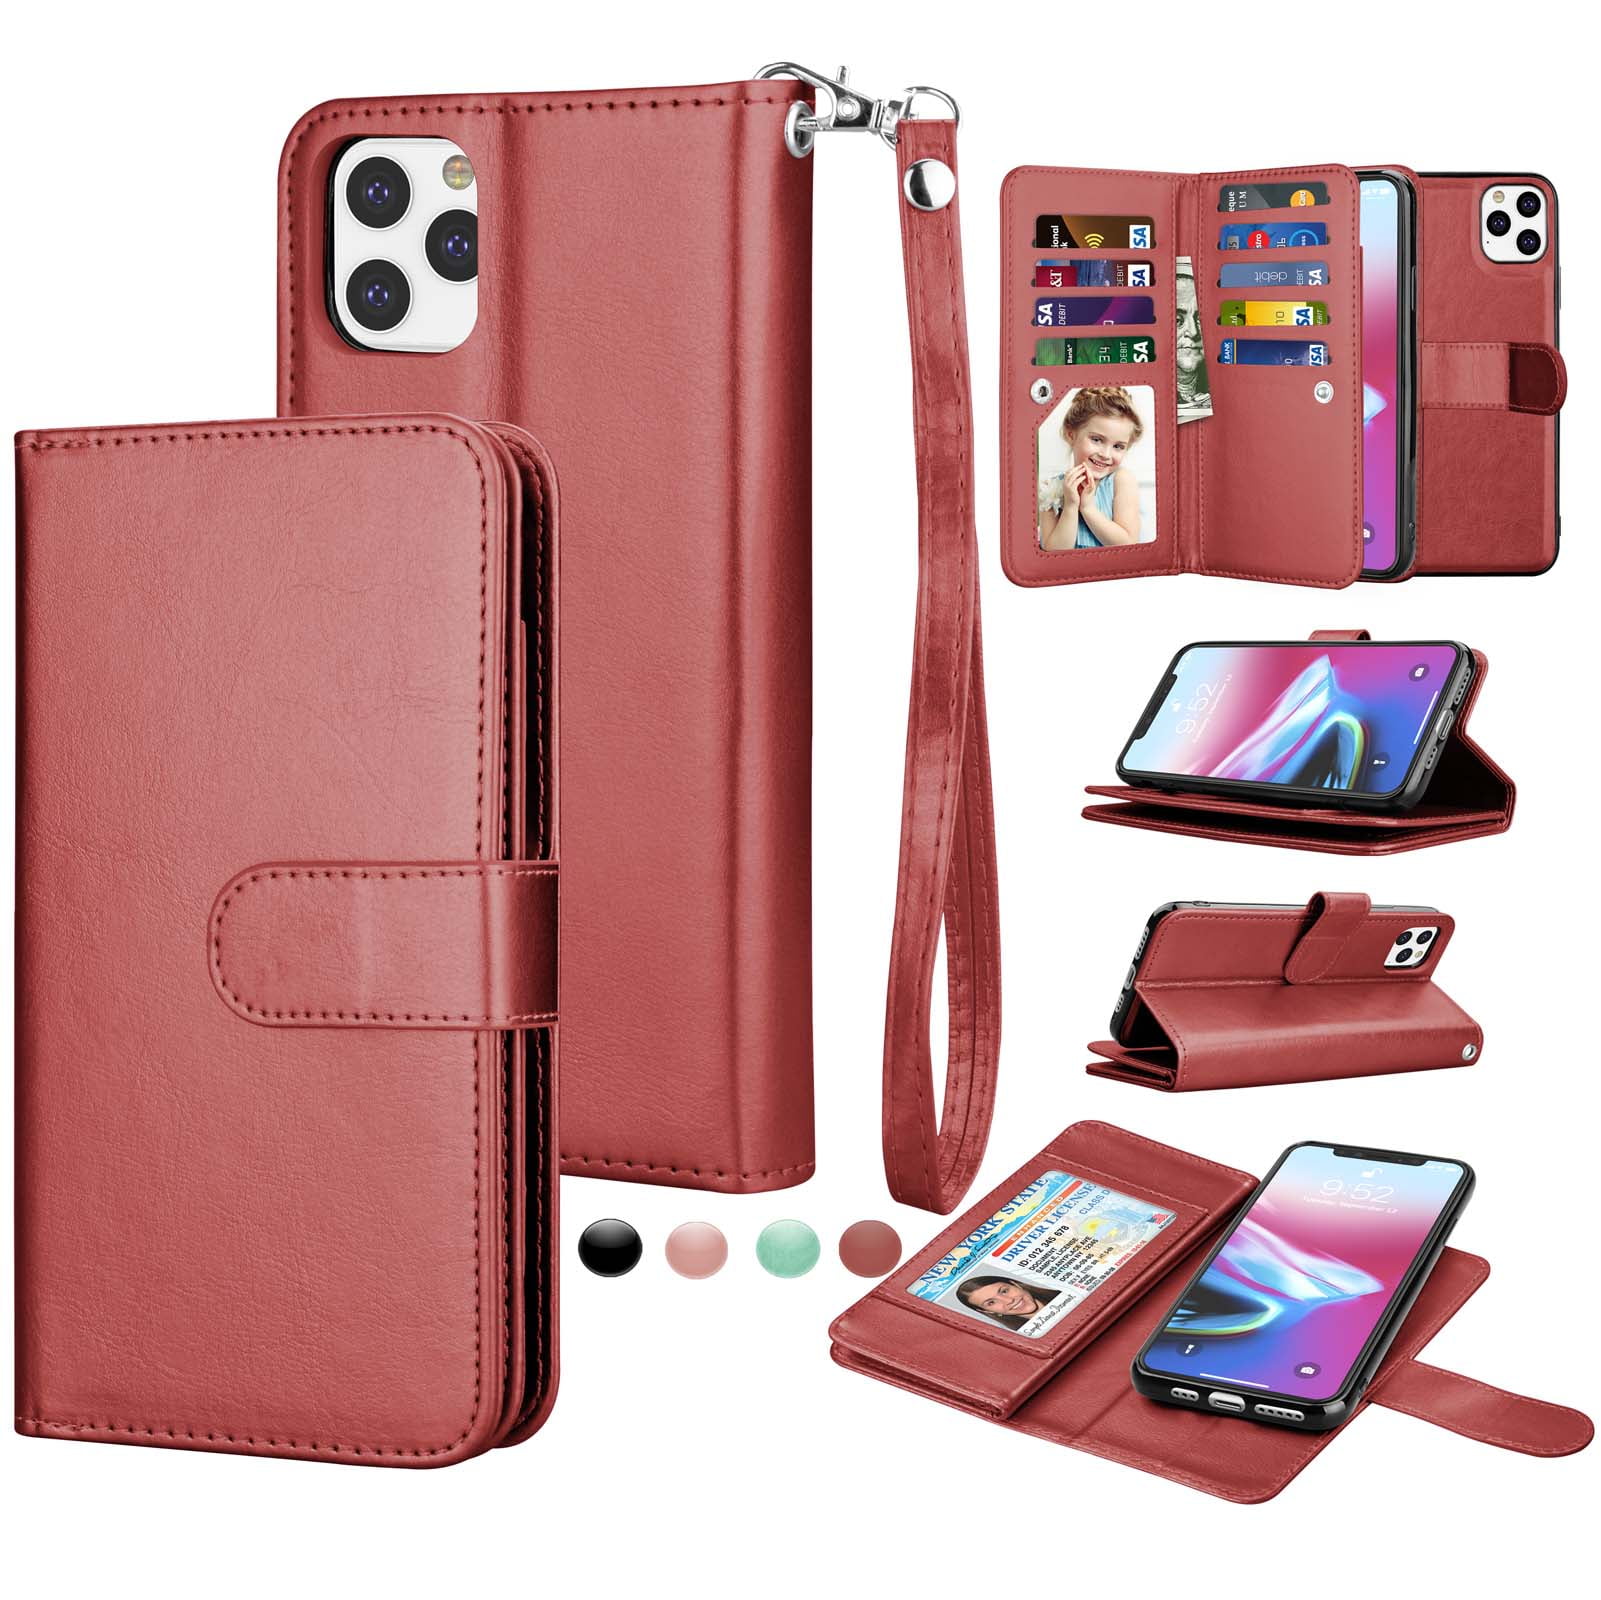 XYX Wallet Case for iPhone 11, RFID Blocking PU Leather Card Slots Magnetic  Kickstand Shockproof Protective Cover for iPhone 11 6.1 Inch, Light Pink